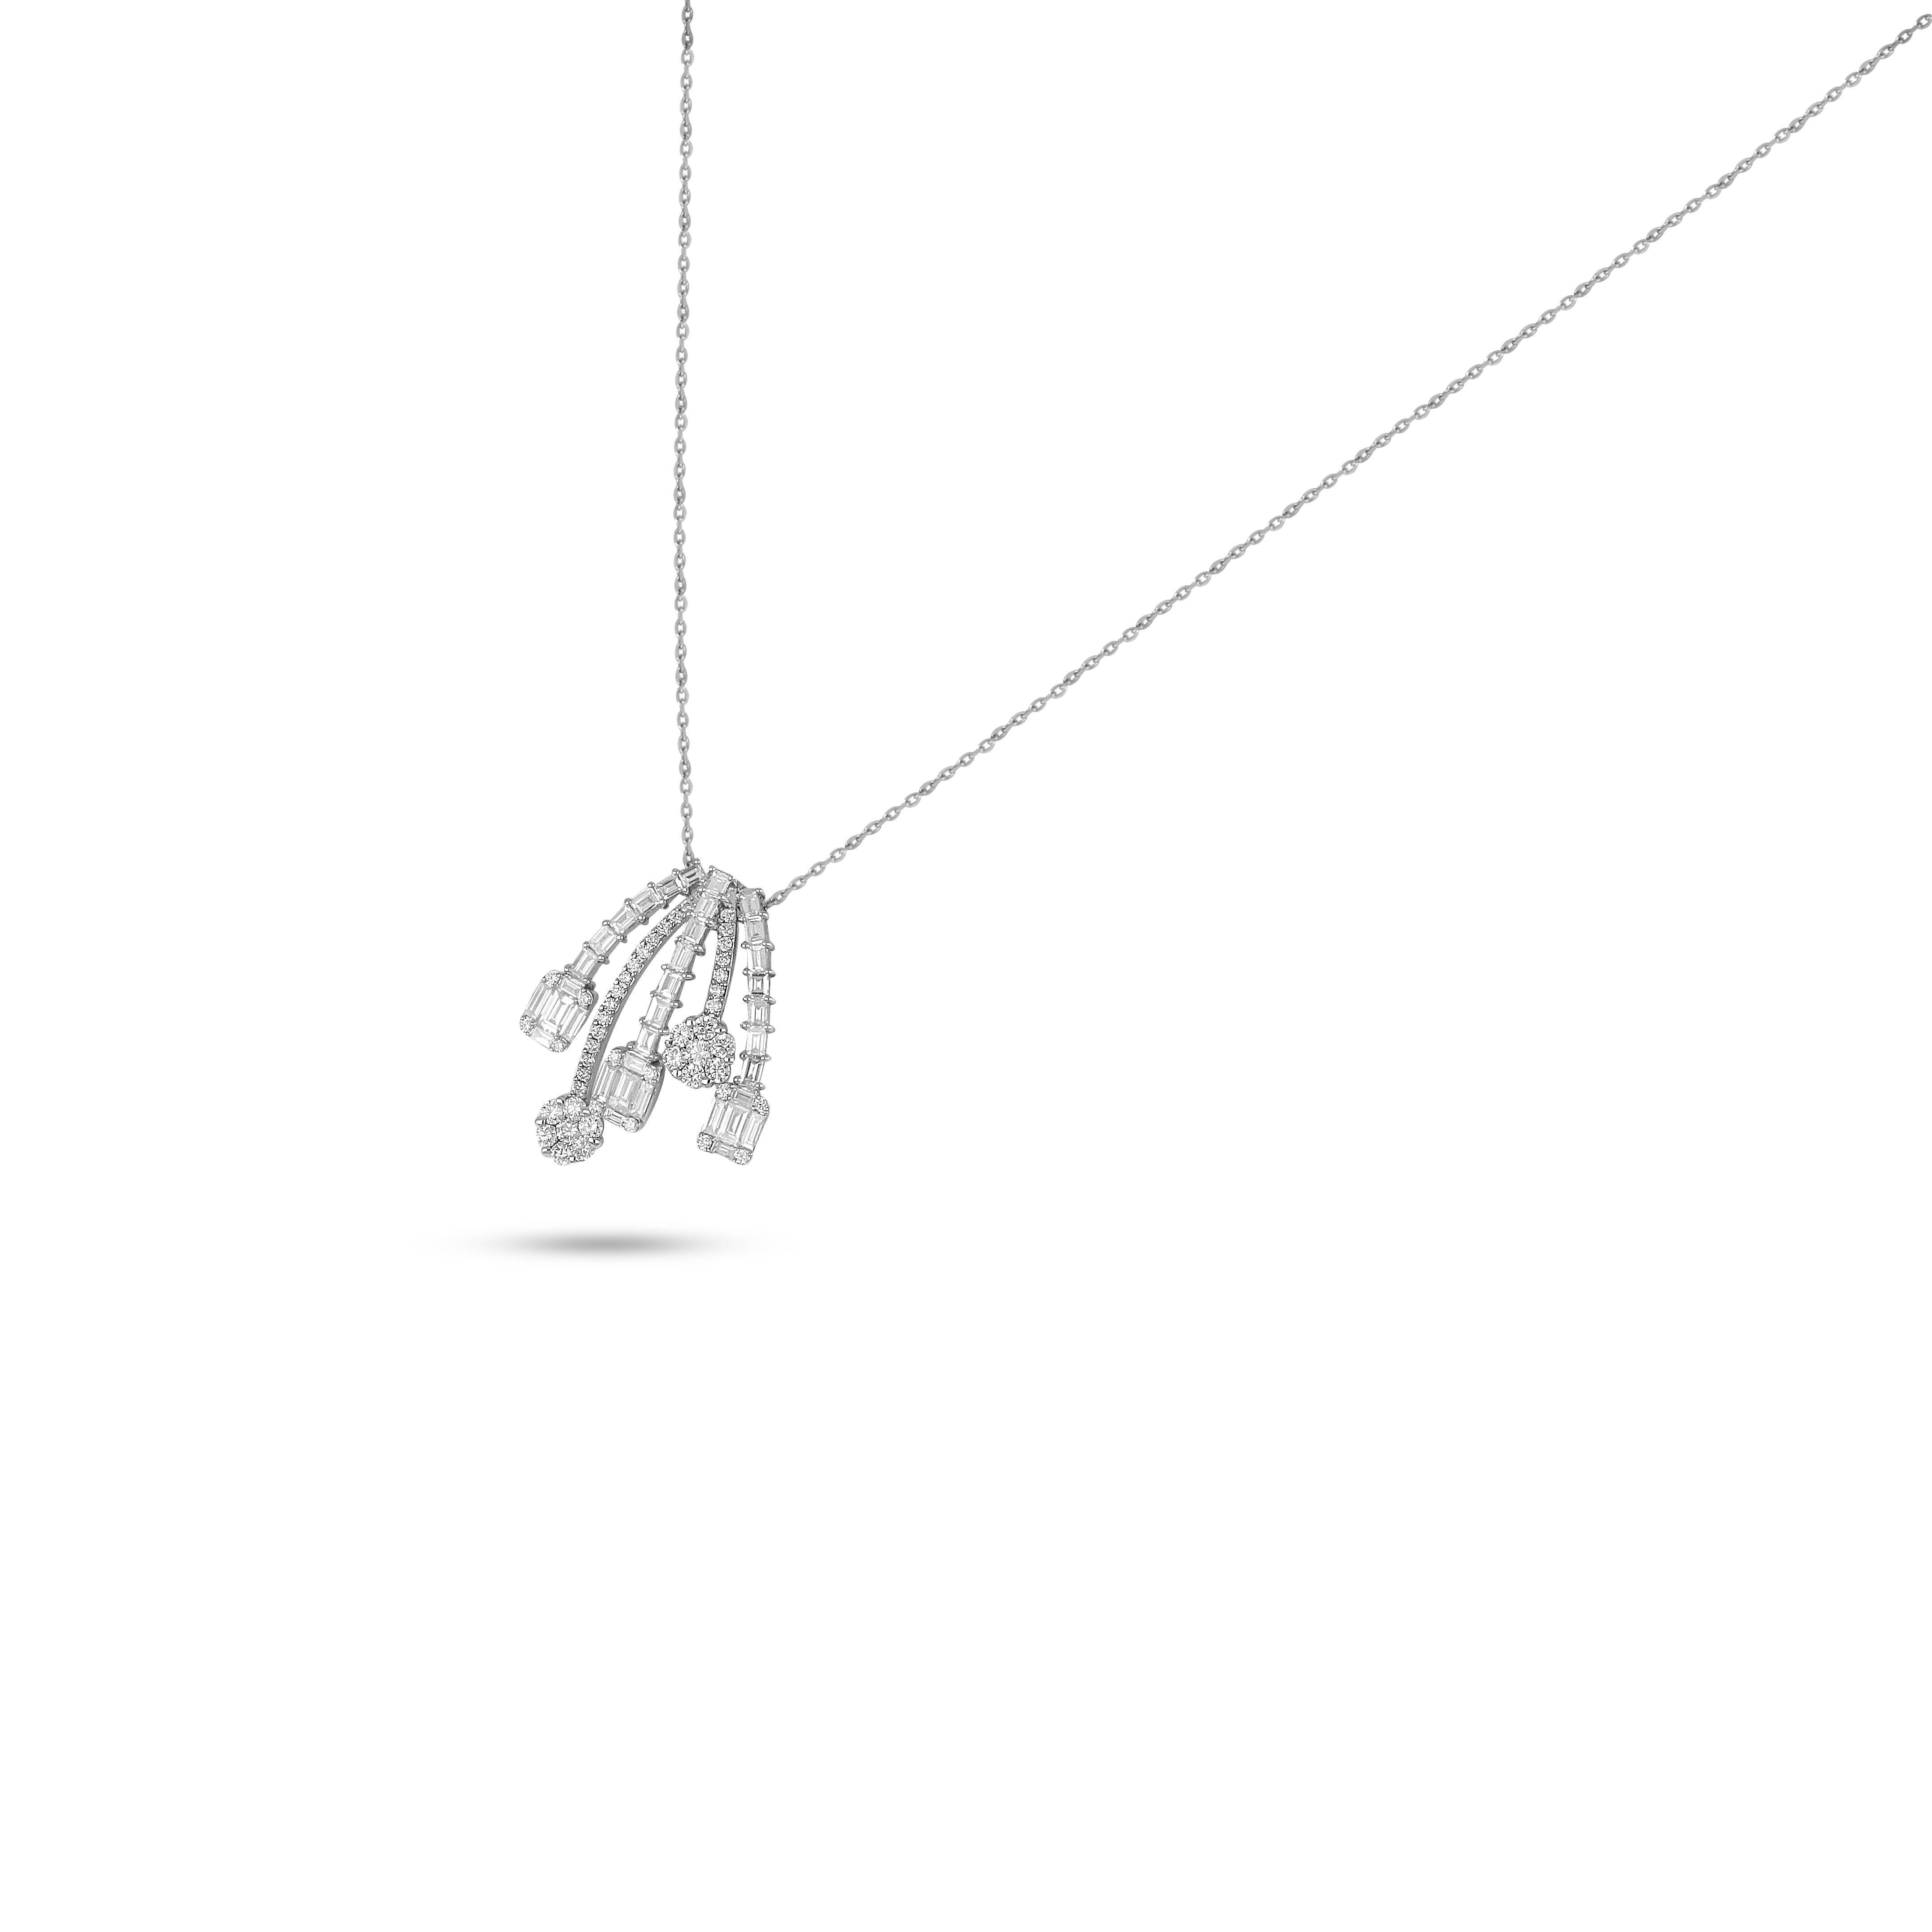 Suspended from a delicate 18 karat white gold chain, Amwaj diamonds pendant features multi cut diamonds set to form an elegant waterfall motif. Beneath is suspended a charming cascade of round and baguette shape diamond drops.
18 Karat White Gold